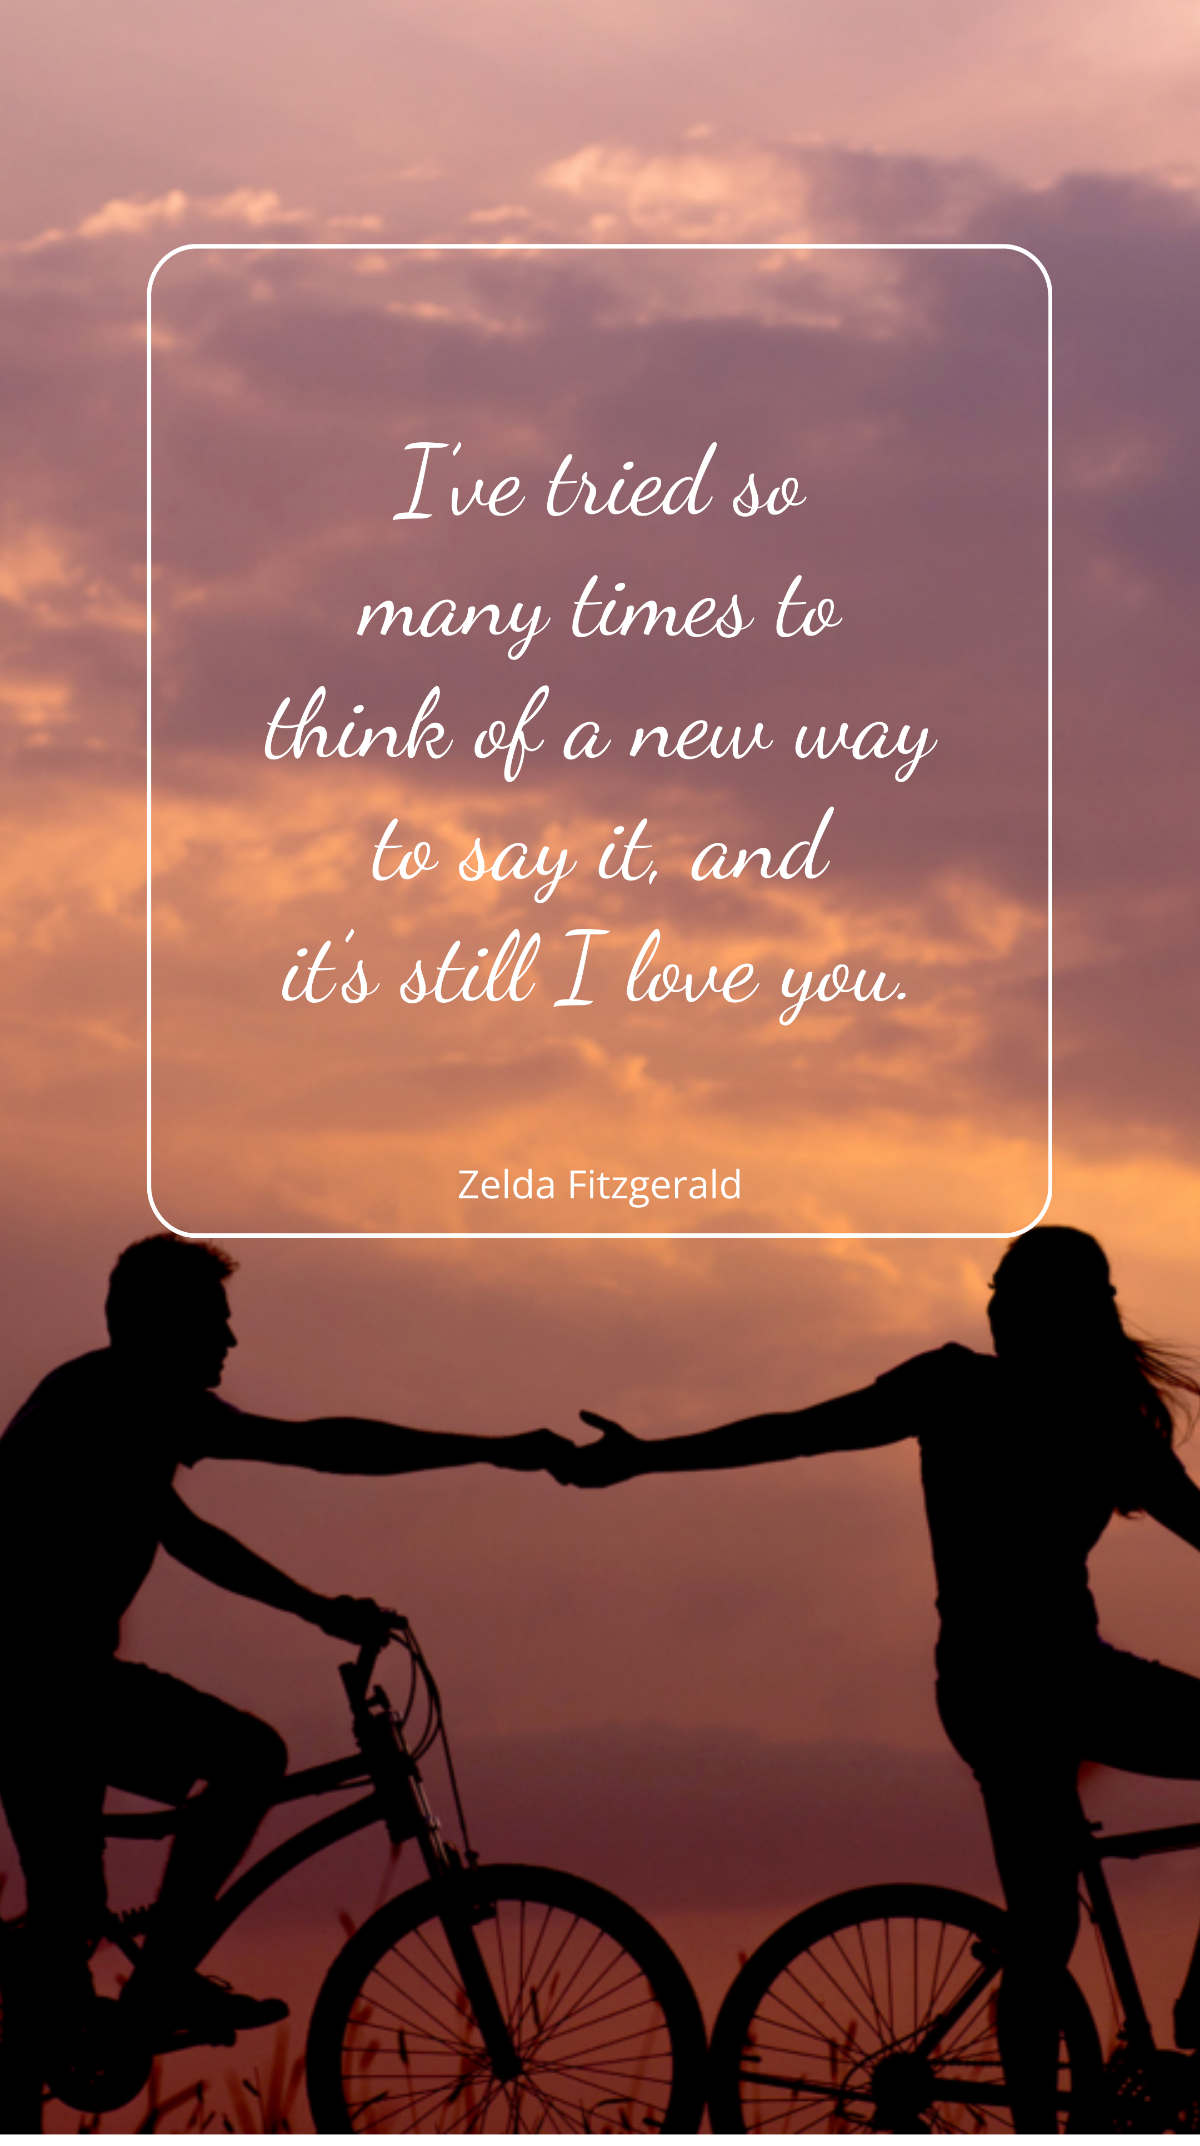 Zelda Fitzgerald - “I’ve tried so many times to think of a new way to say it, and it’s still I love you.” Template